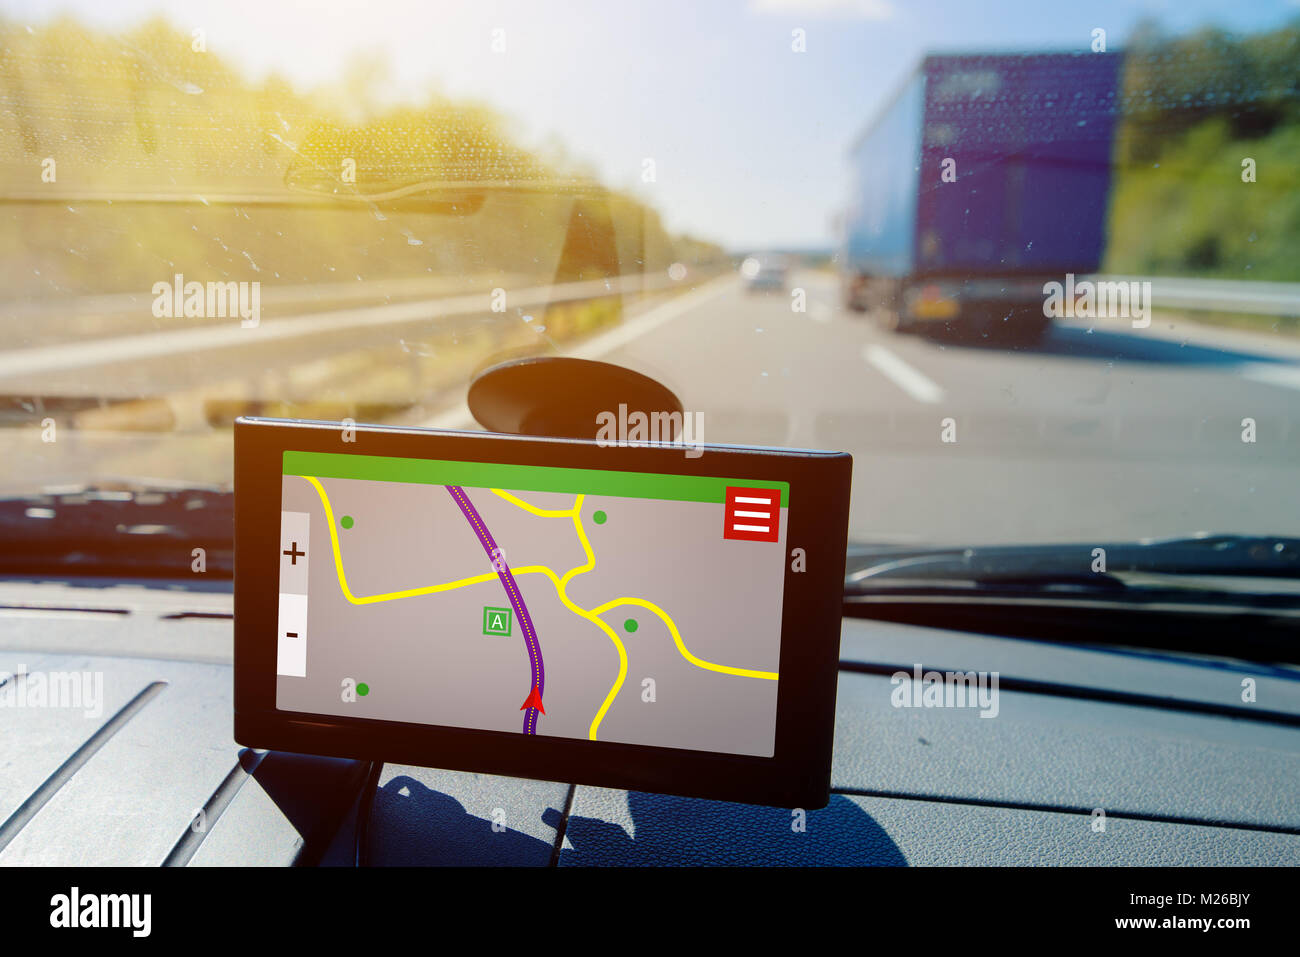 GPS (Global Positioning System) car navigation, help and assistance with direction on road Stock Photo